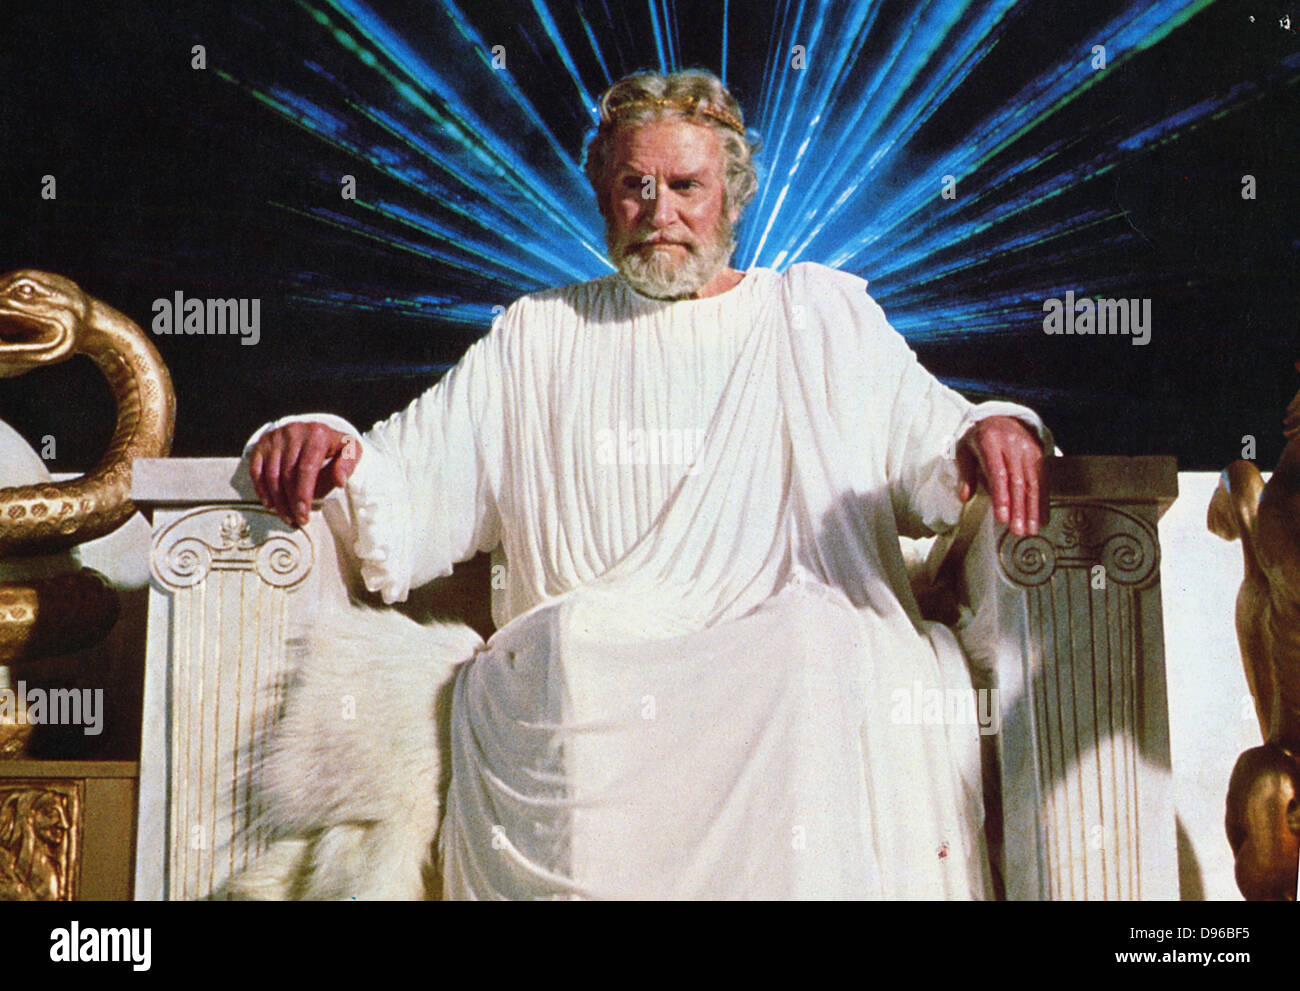 Laurence Olivier (1907-1989) English actor, producer and director. Still of Olivier as the god Zeus from the 1981 film 'Clash of the Titans'. MGM. Stock Photo